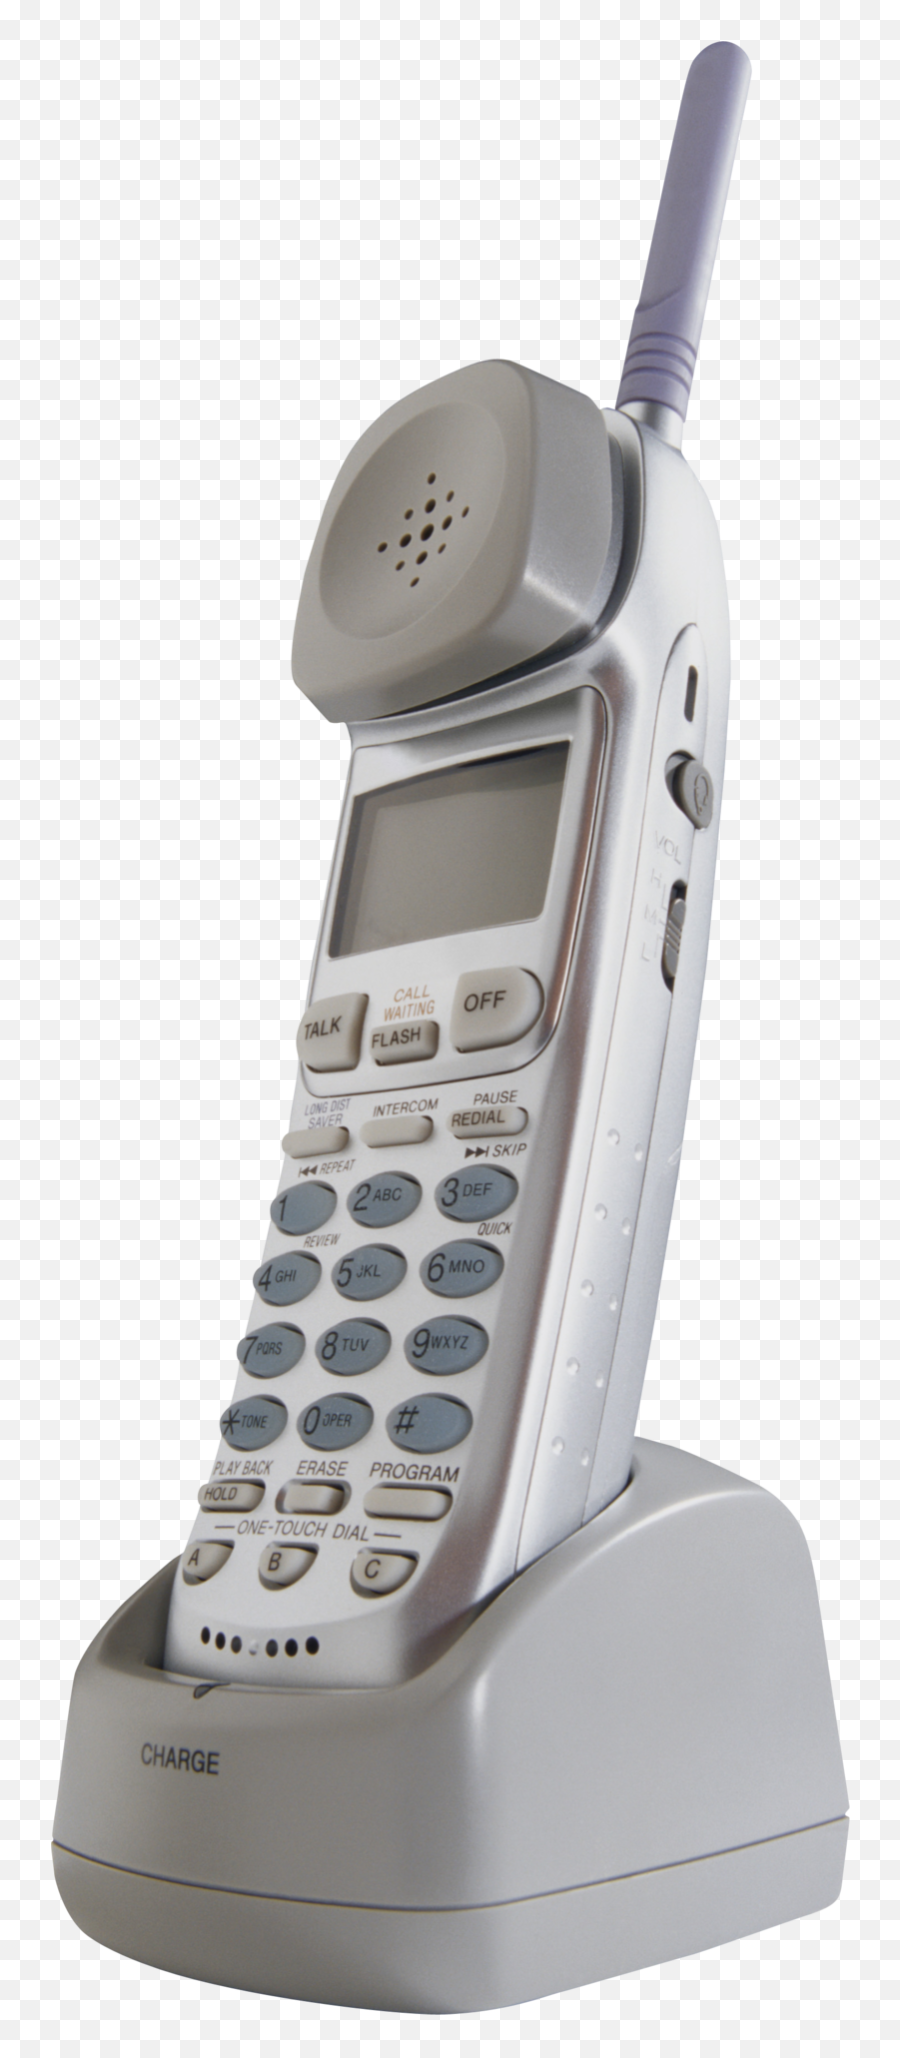 Download Phone Png Download Png Image With Transparent - Office Equipment Emoji,Telephone Png